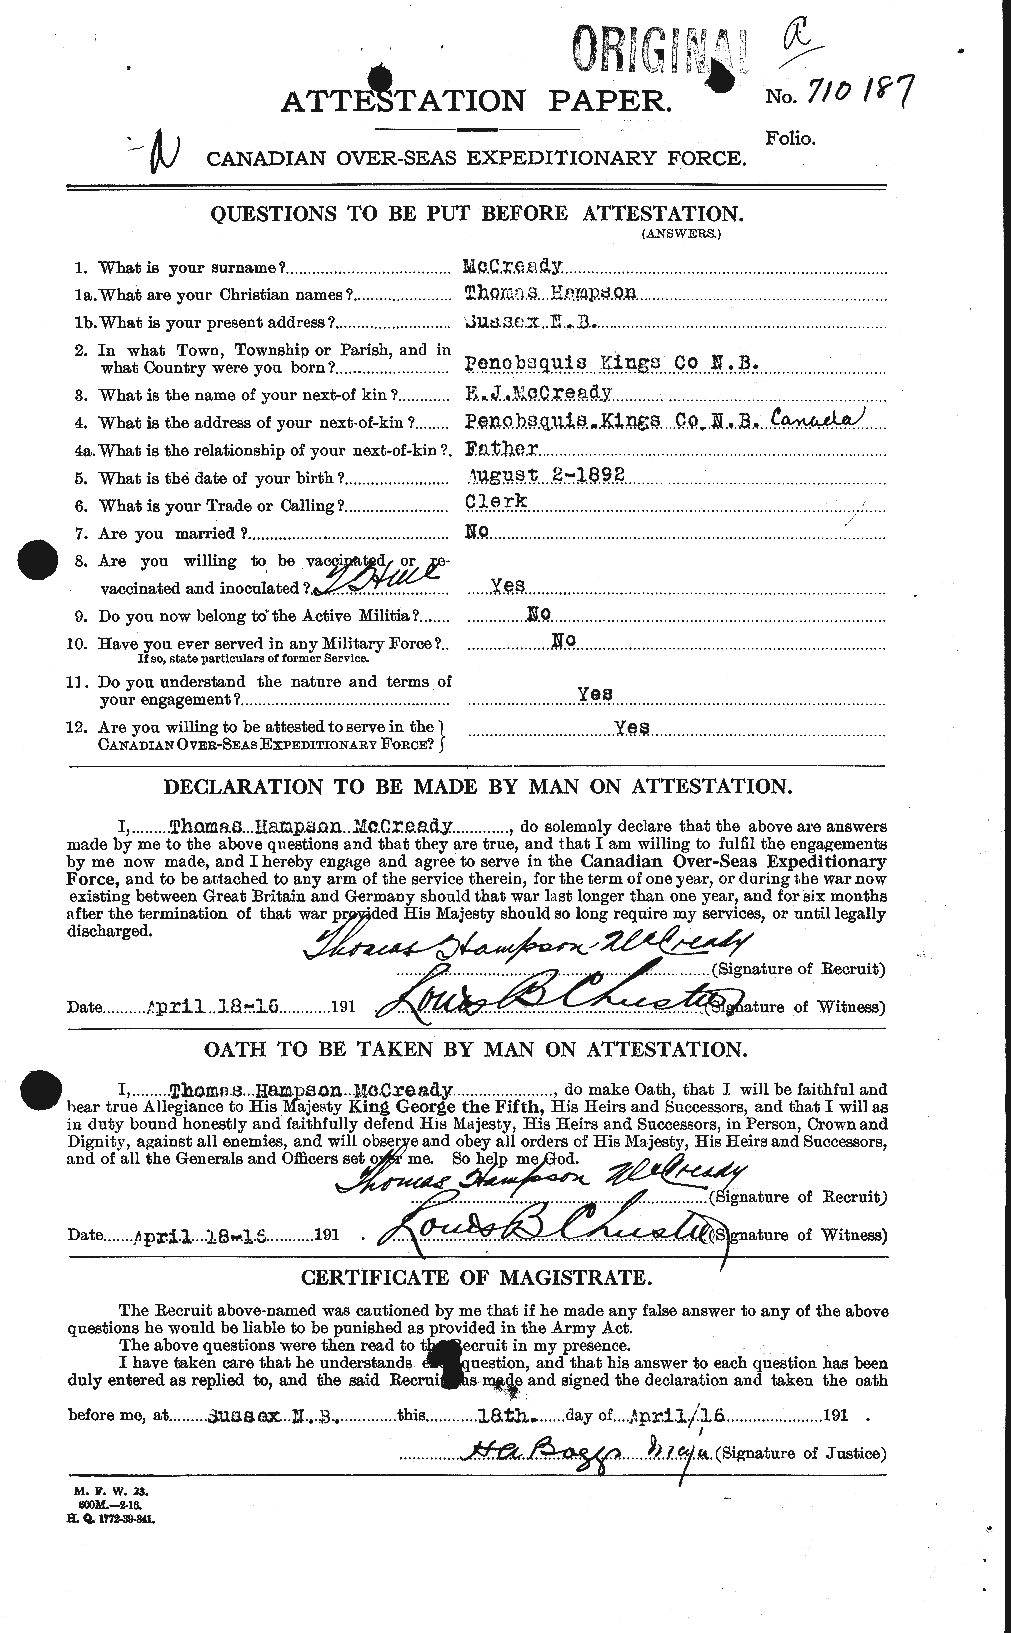 Personnel Records of the First World War - CEF 136020a